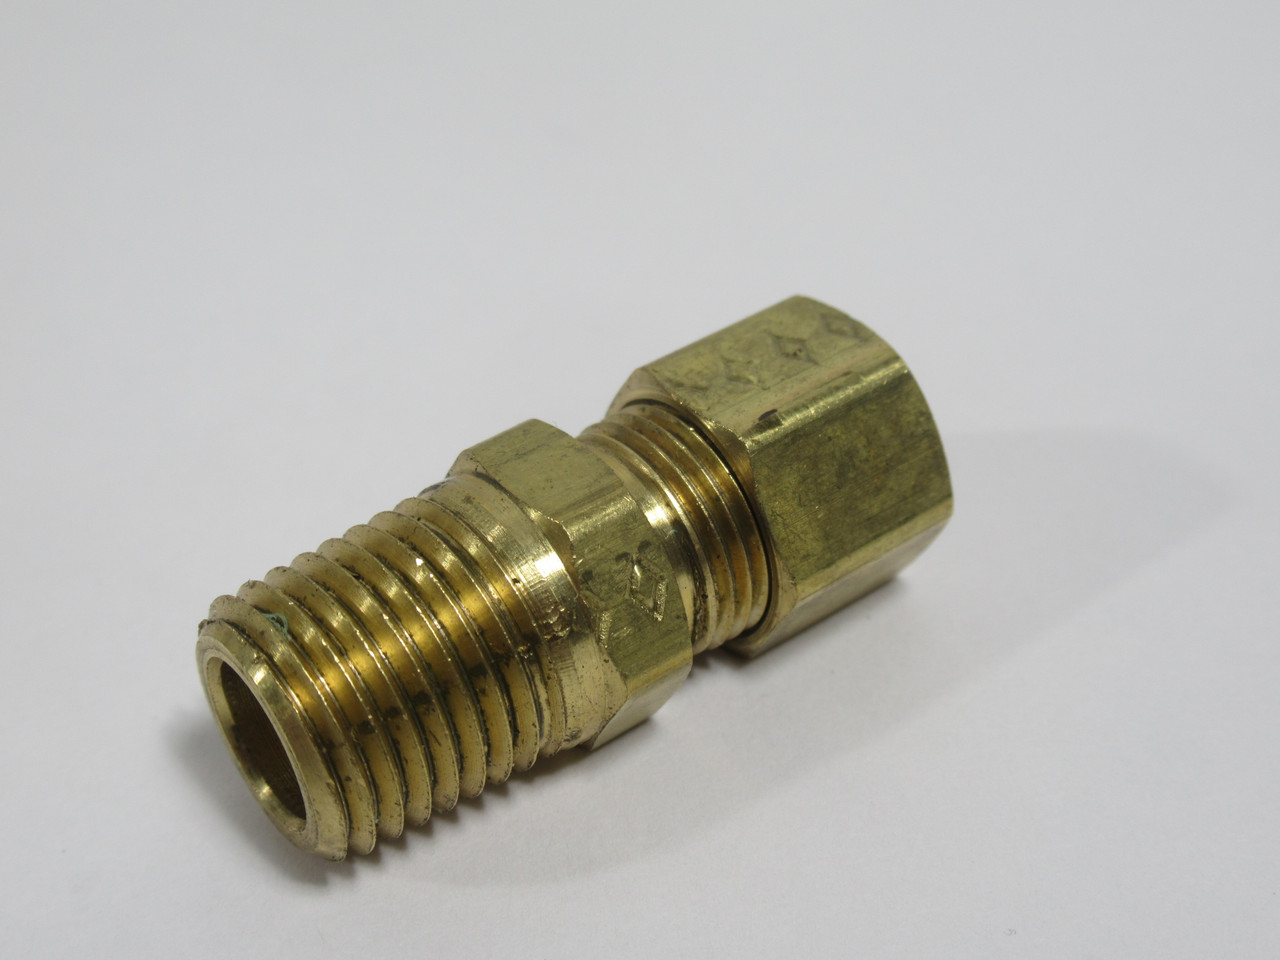 Generic Brass Compression Connector 5/16" Tube x 1/4" Male NPT Lot of 7 NOP